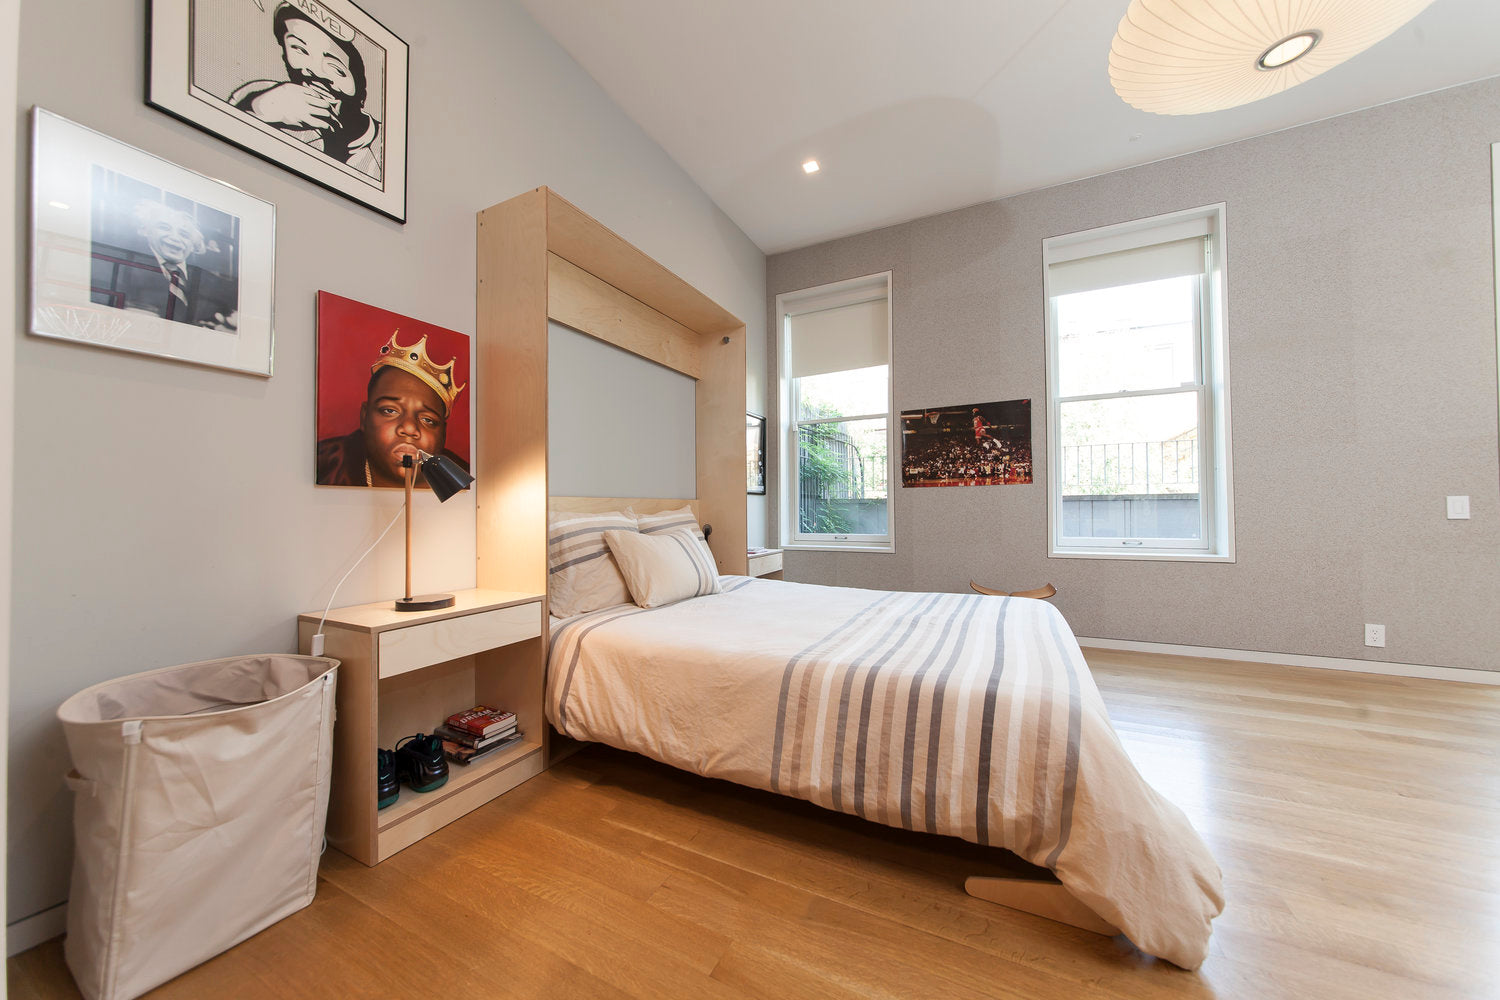 Modern bedroom with bed, side table, lamp, art, and hardwood floor.